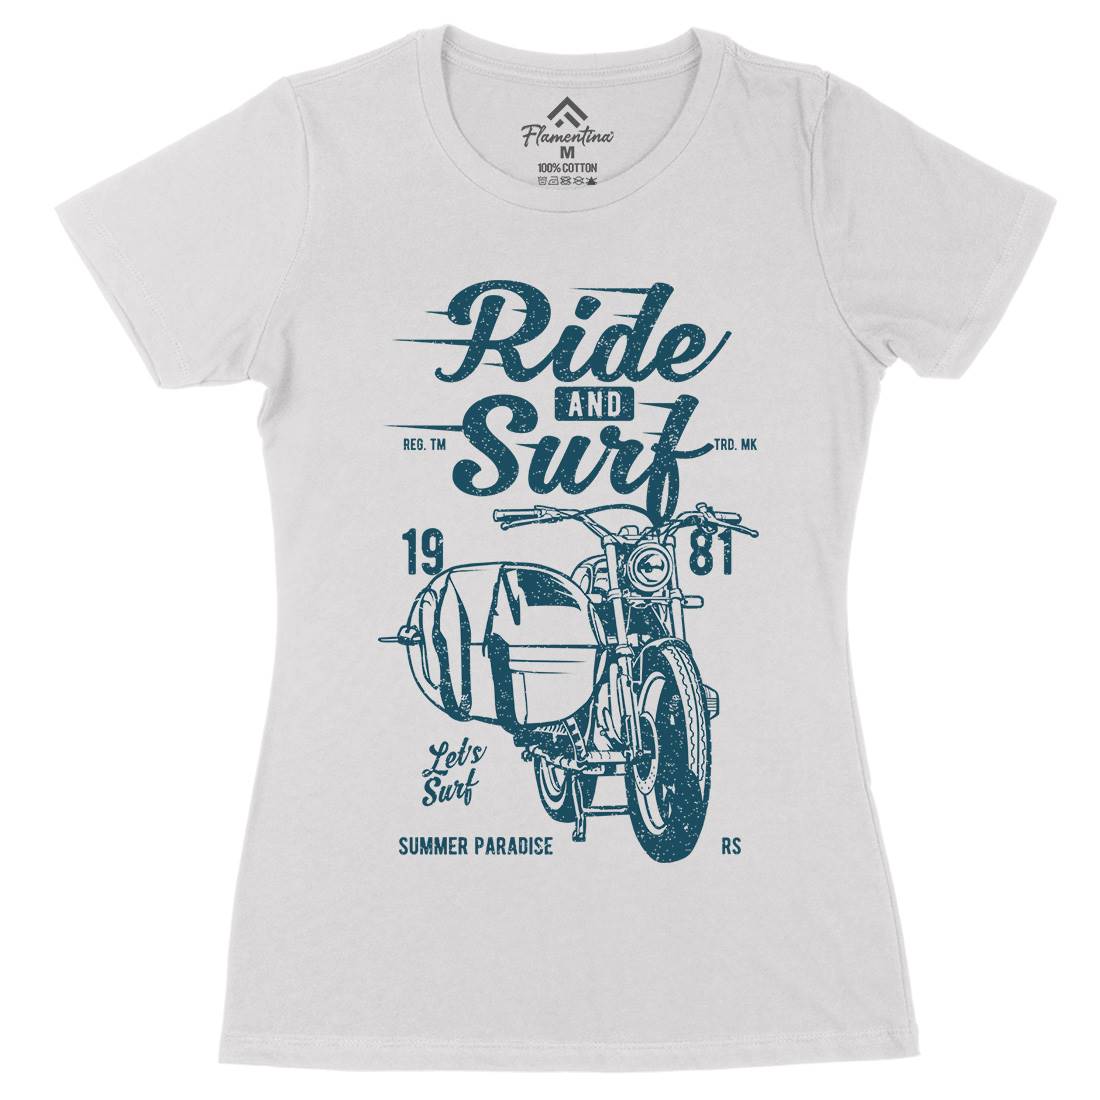 Ride And Womens Organic Crew Neck T-Shirt Surf A742